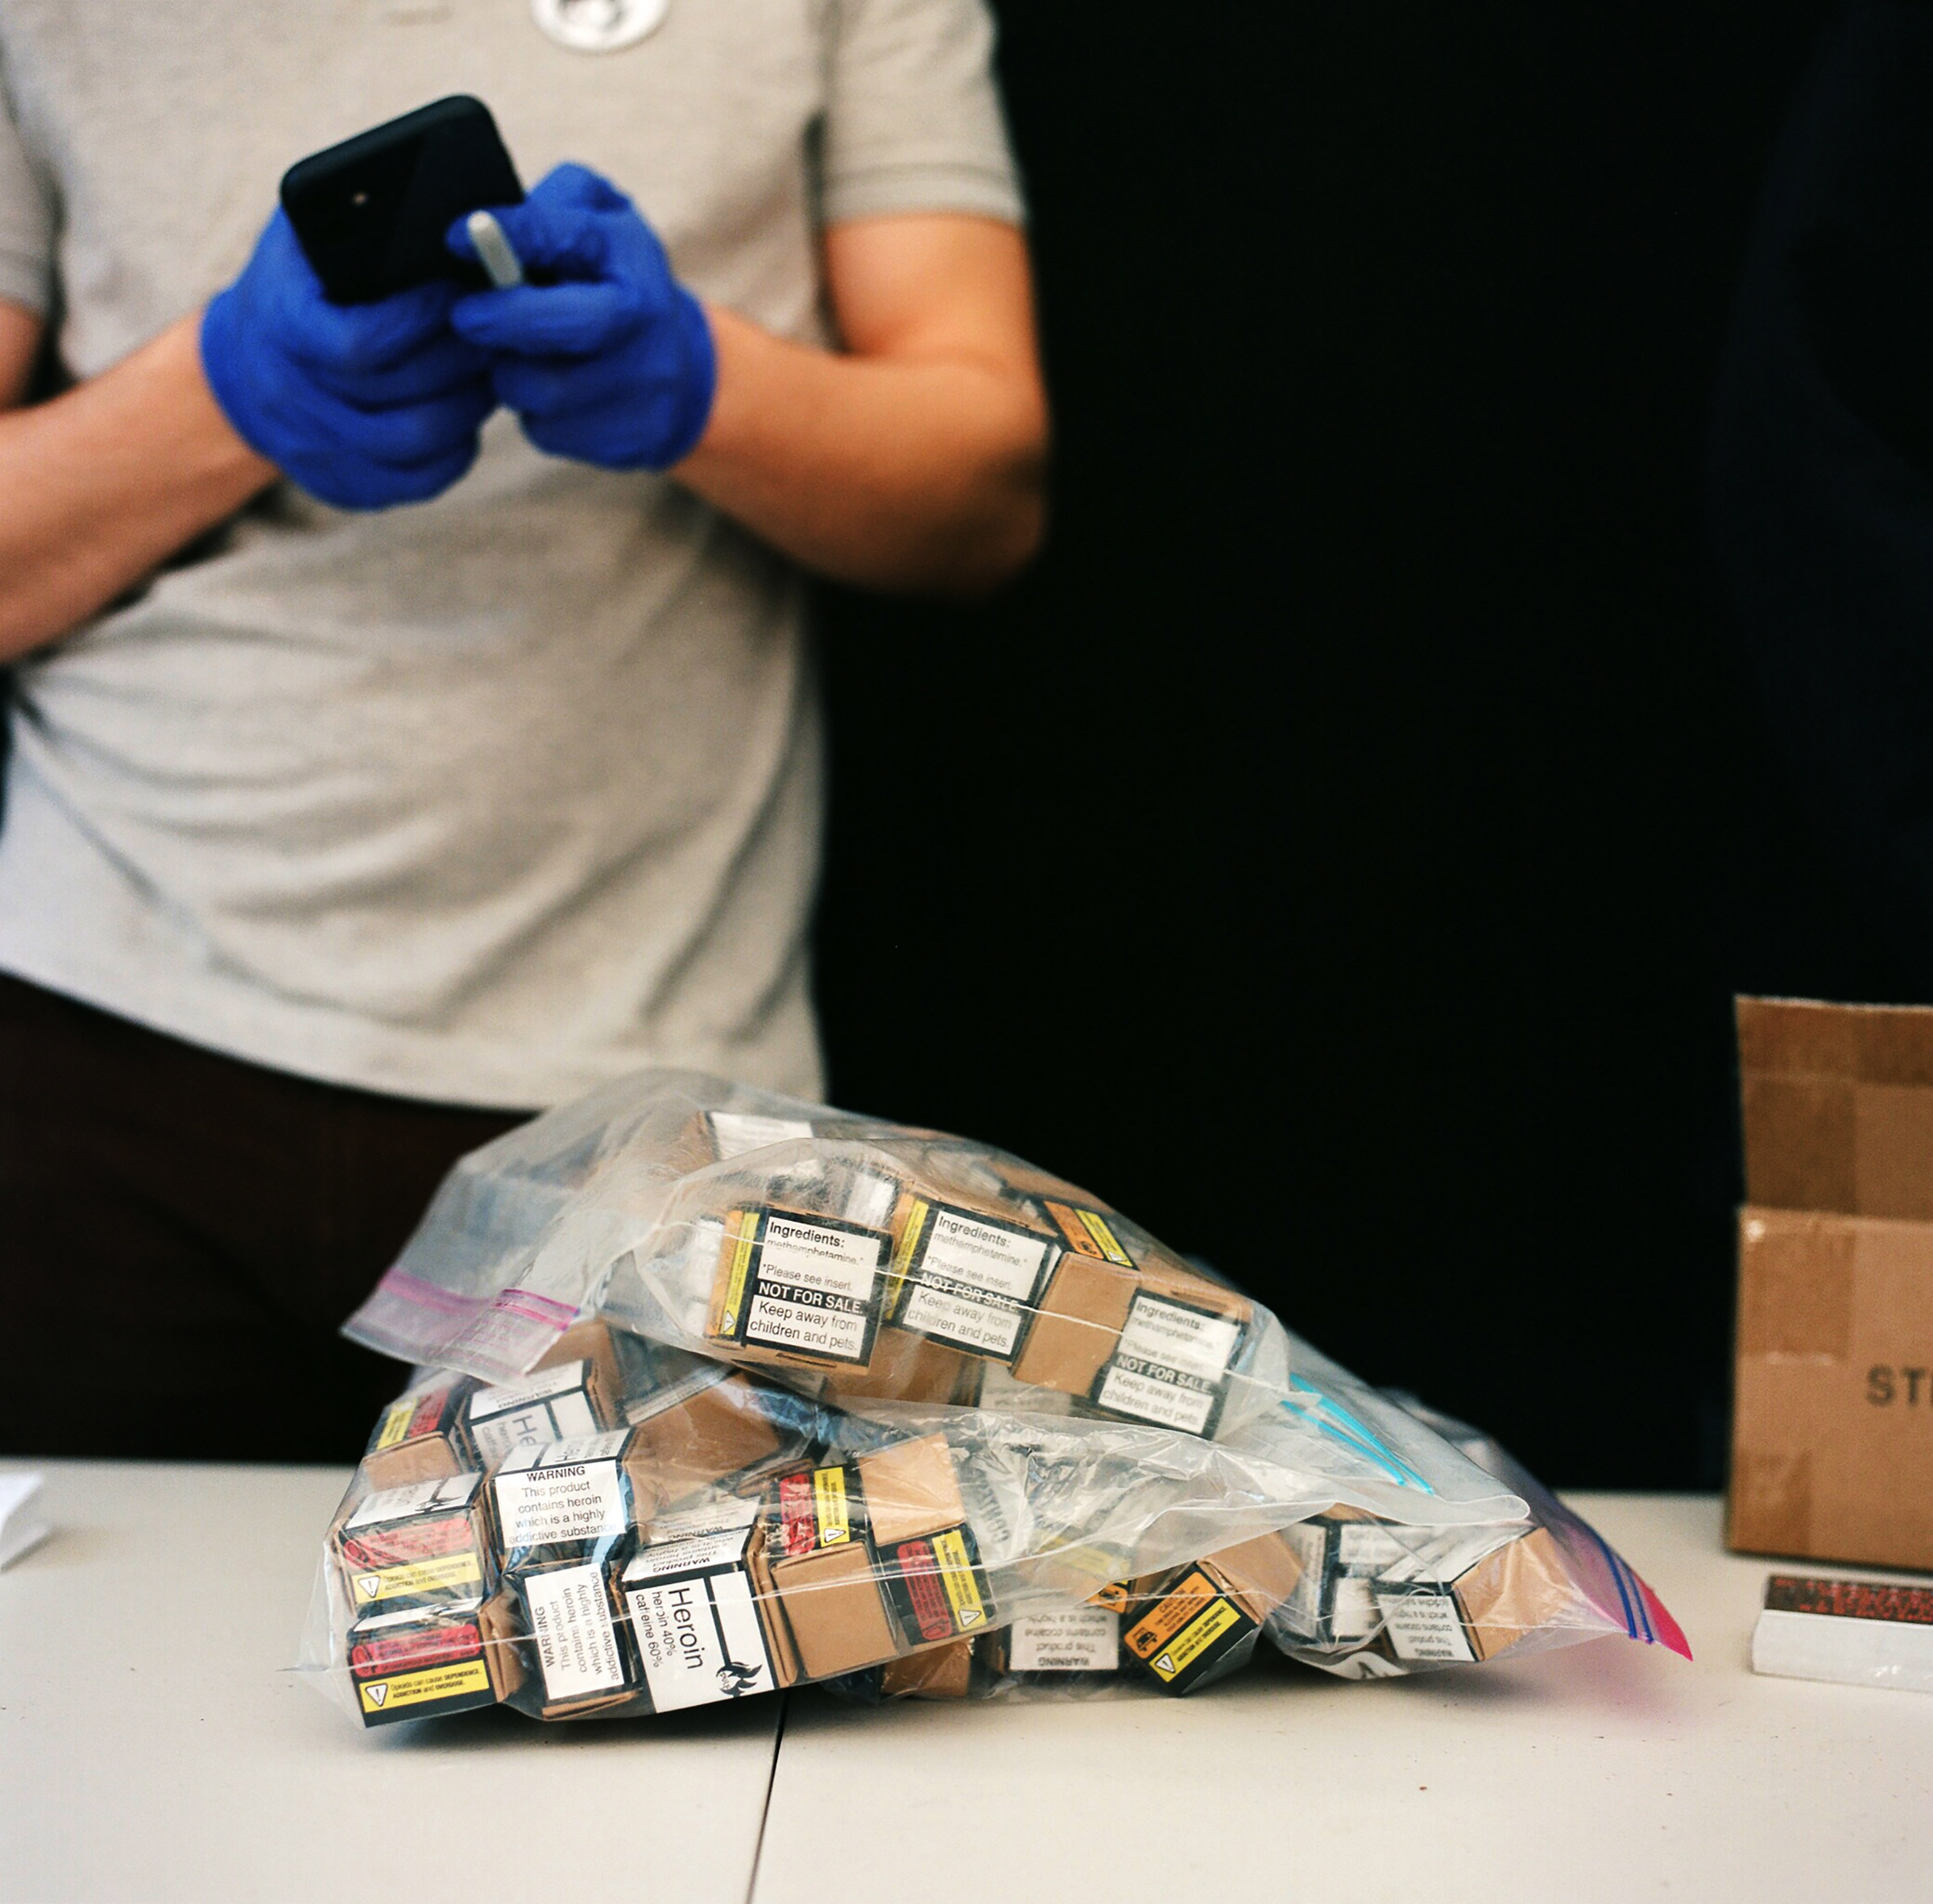 A member of the Drug User Liberation Front hands out illegal drugs that have been tested and determined to be free of fentanyl, then packaged and given warning labels similar to those on cigarette packs, at an event on April 14, 2021. (Jackie Dives)